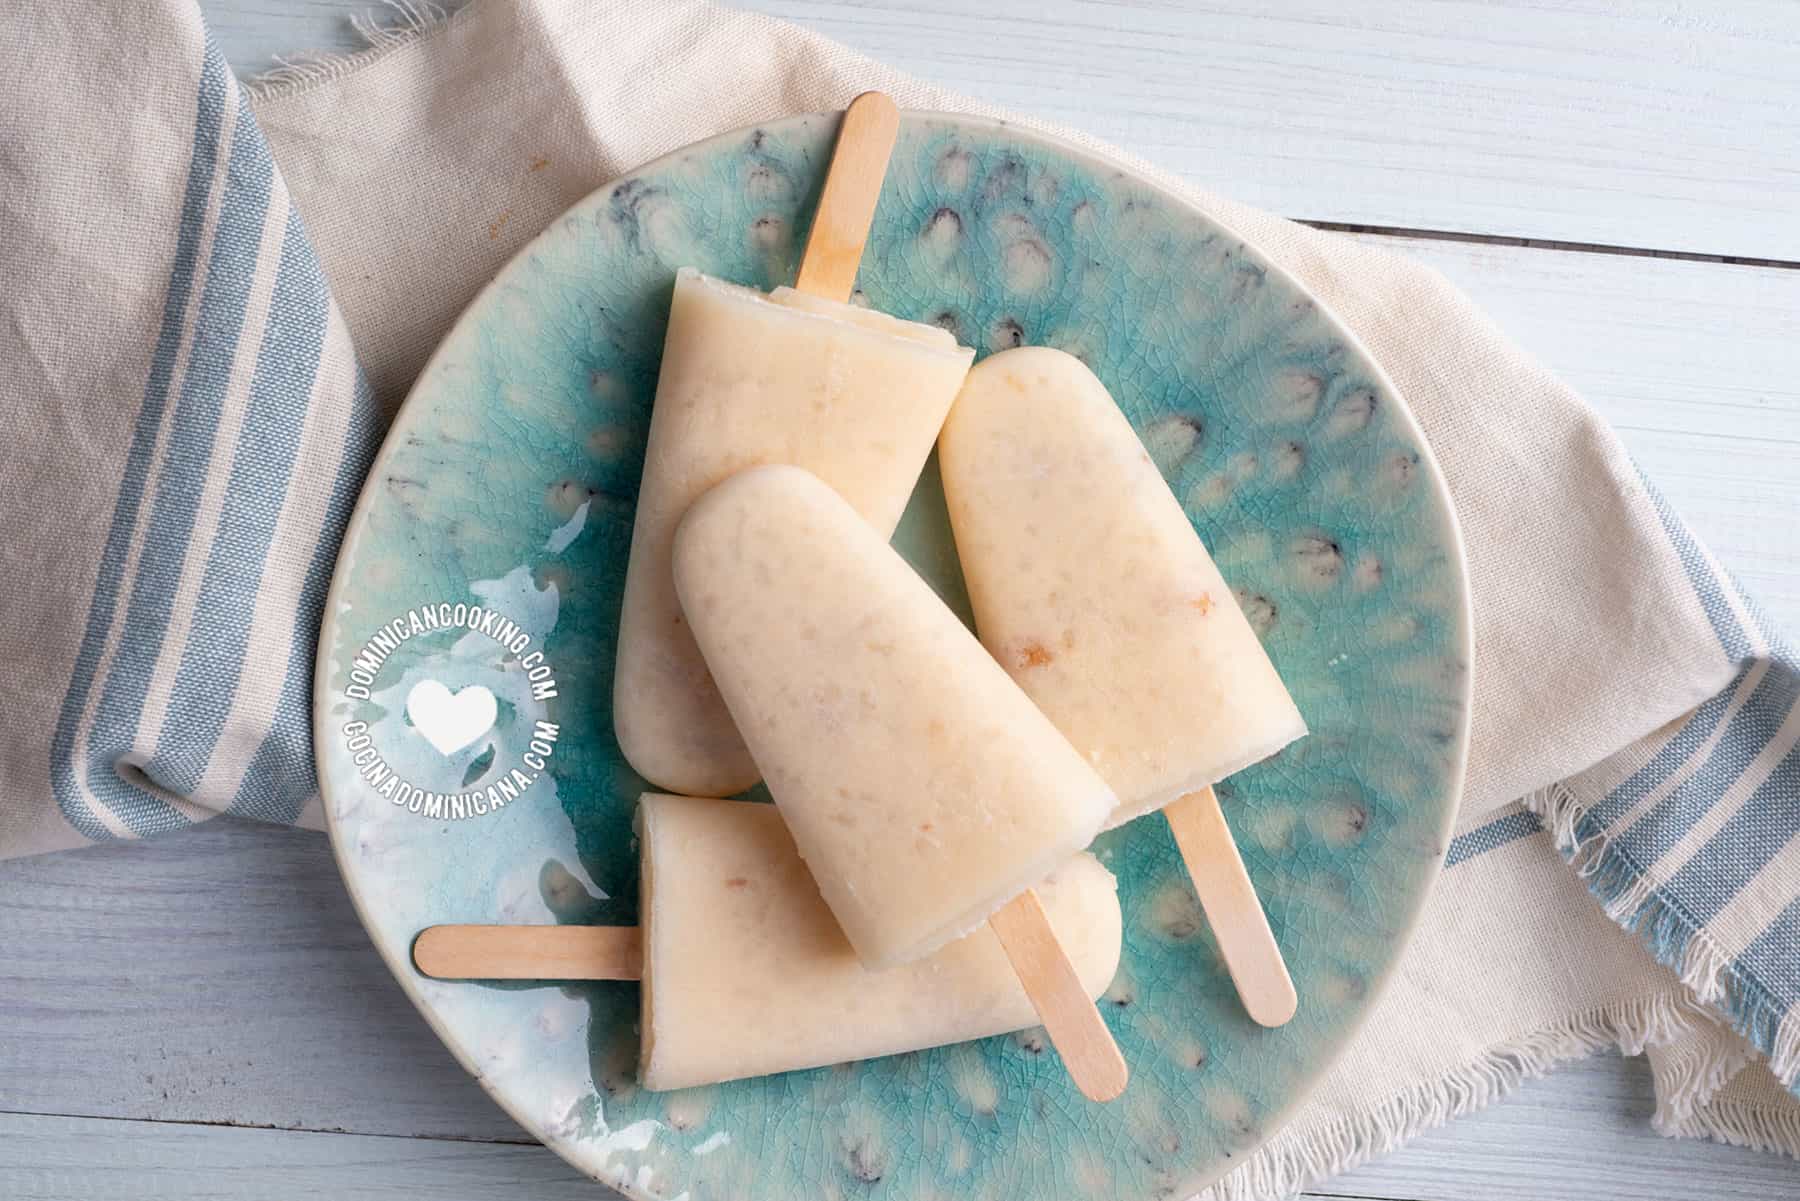 Rice pudding popsicles.